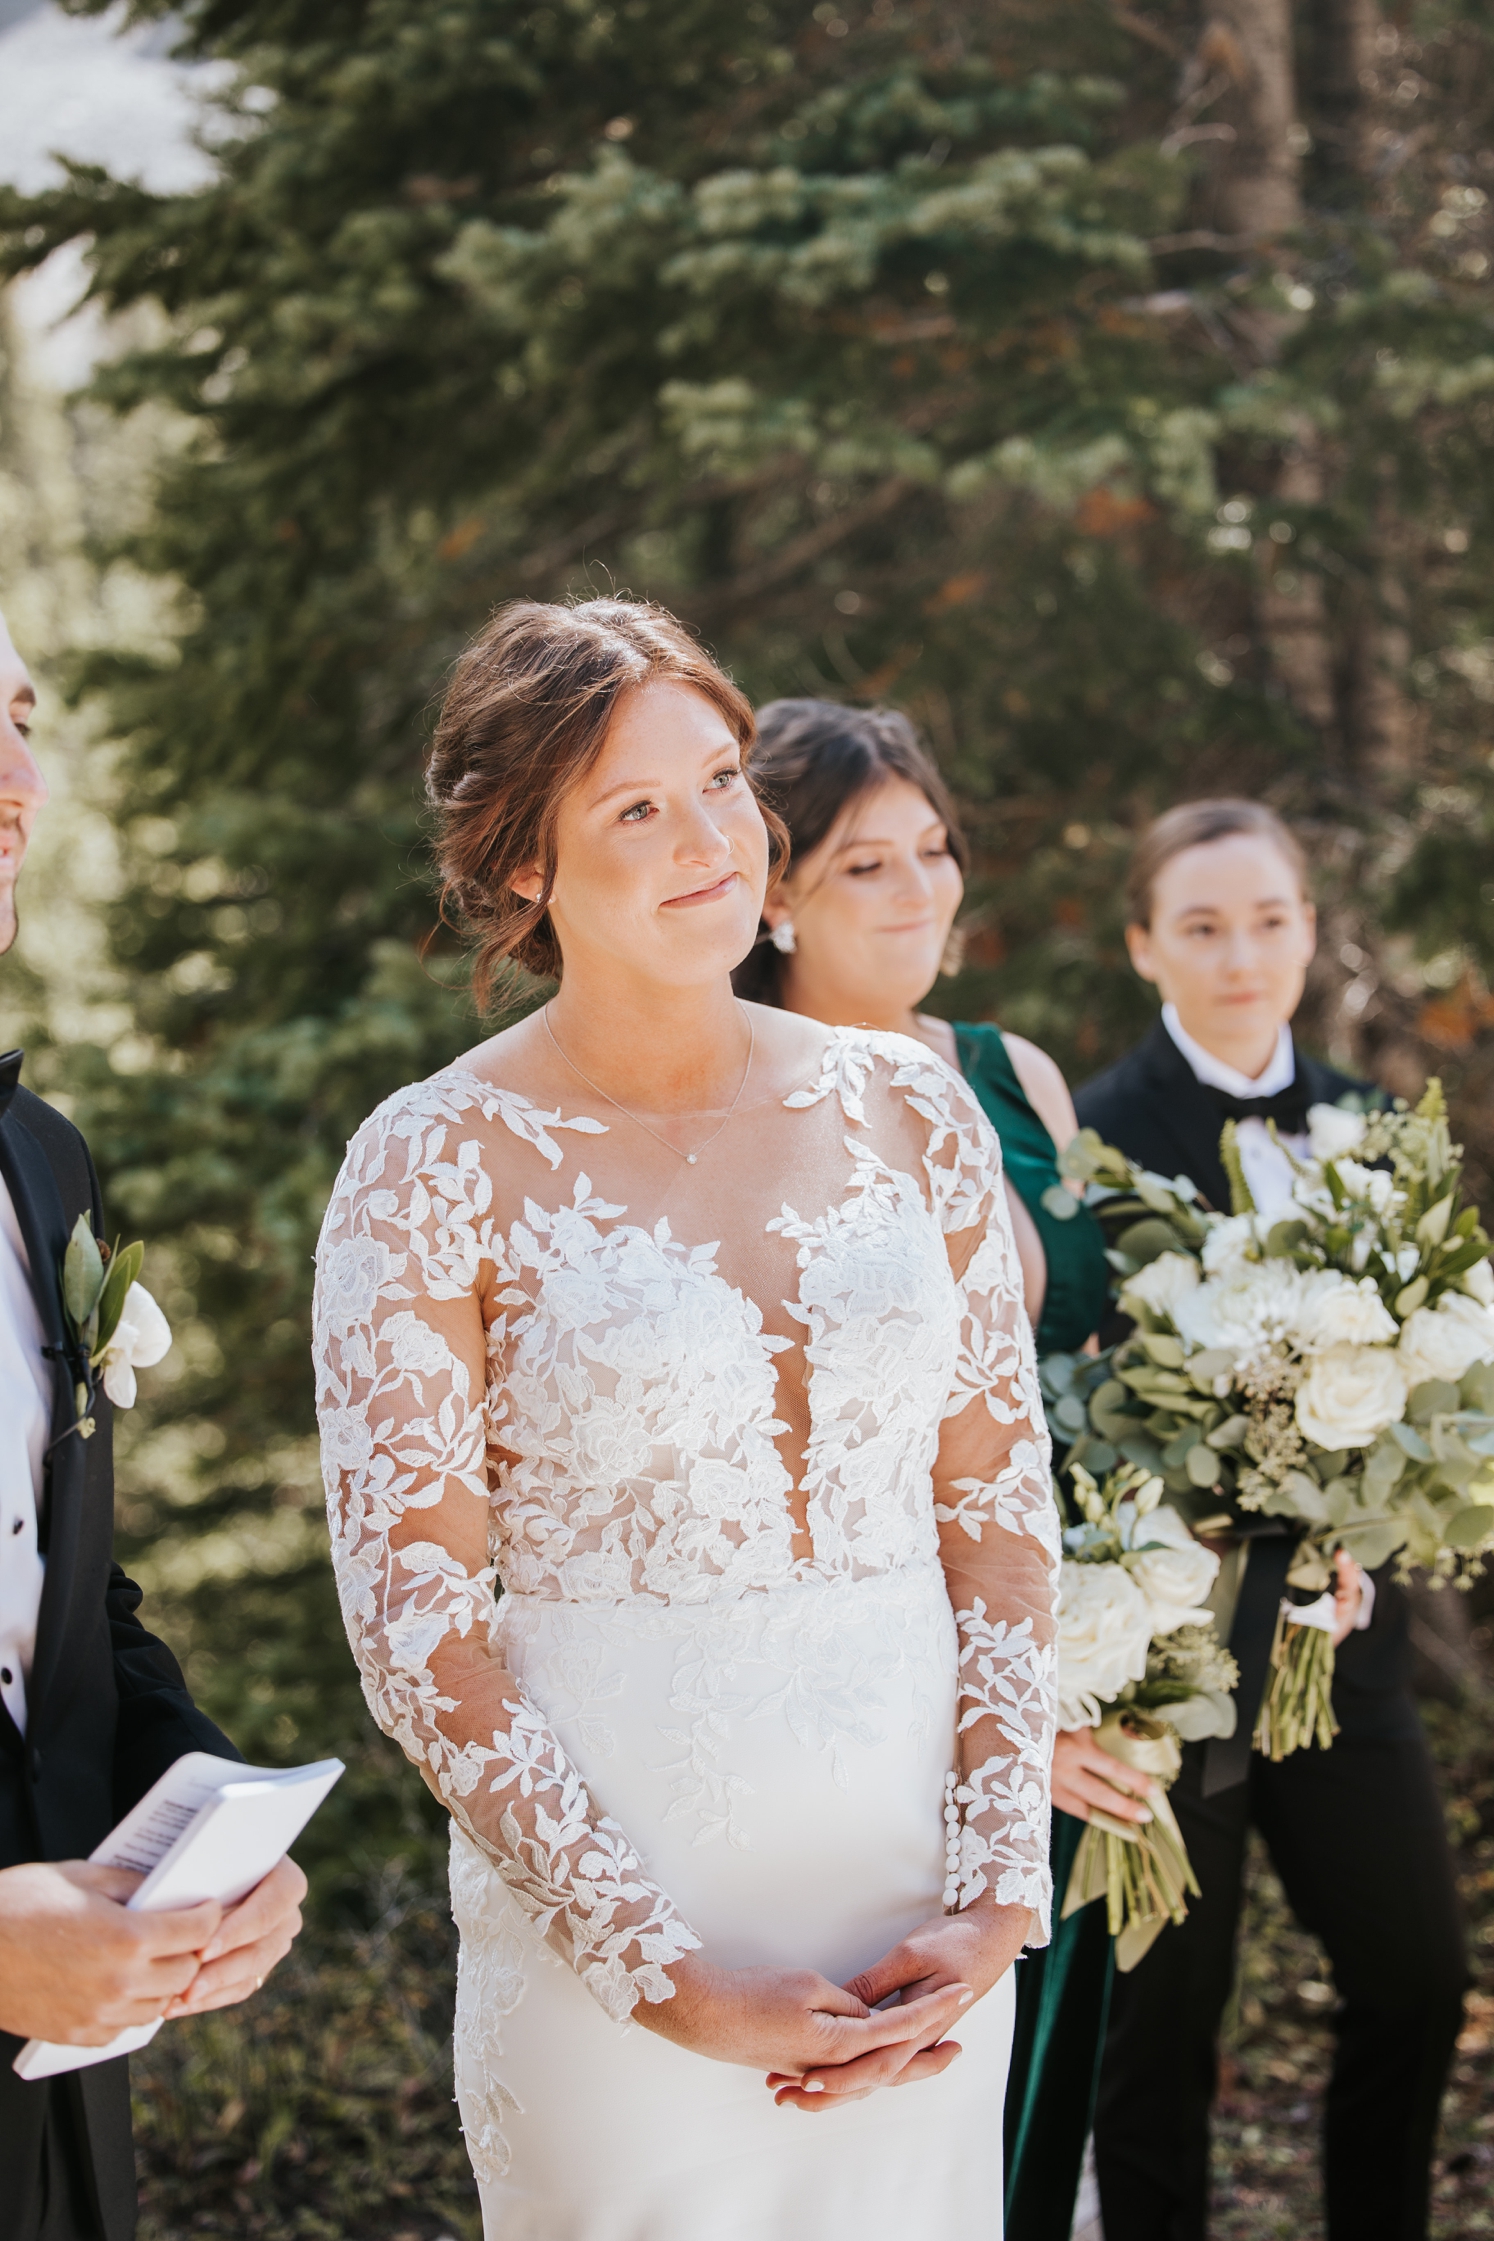 Bride watching partner walk down the aisle at Telluride wedding | McArthur Weddings and Events